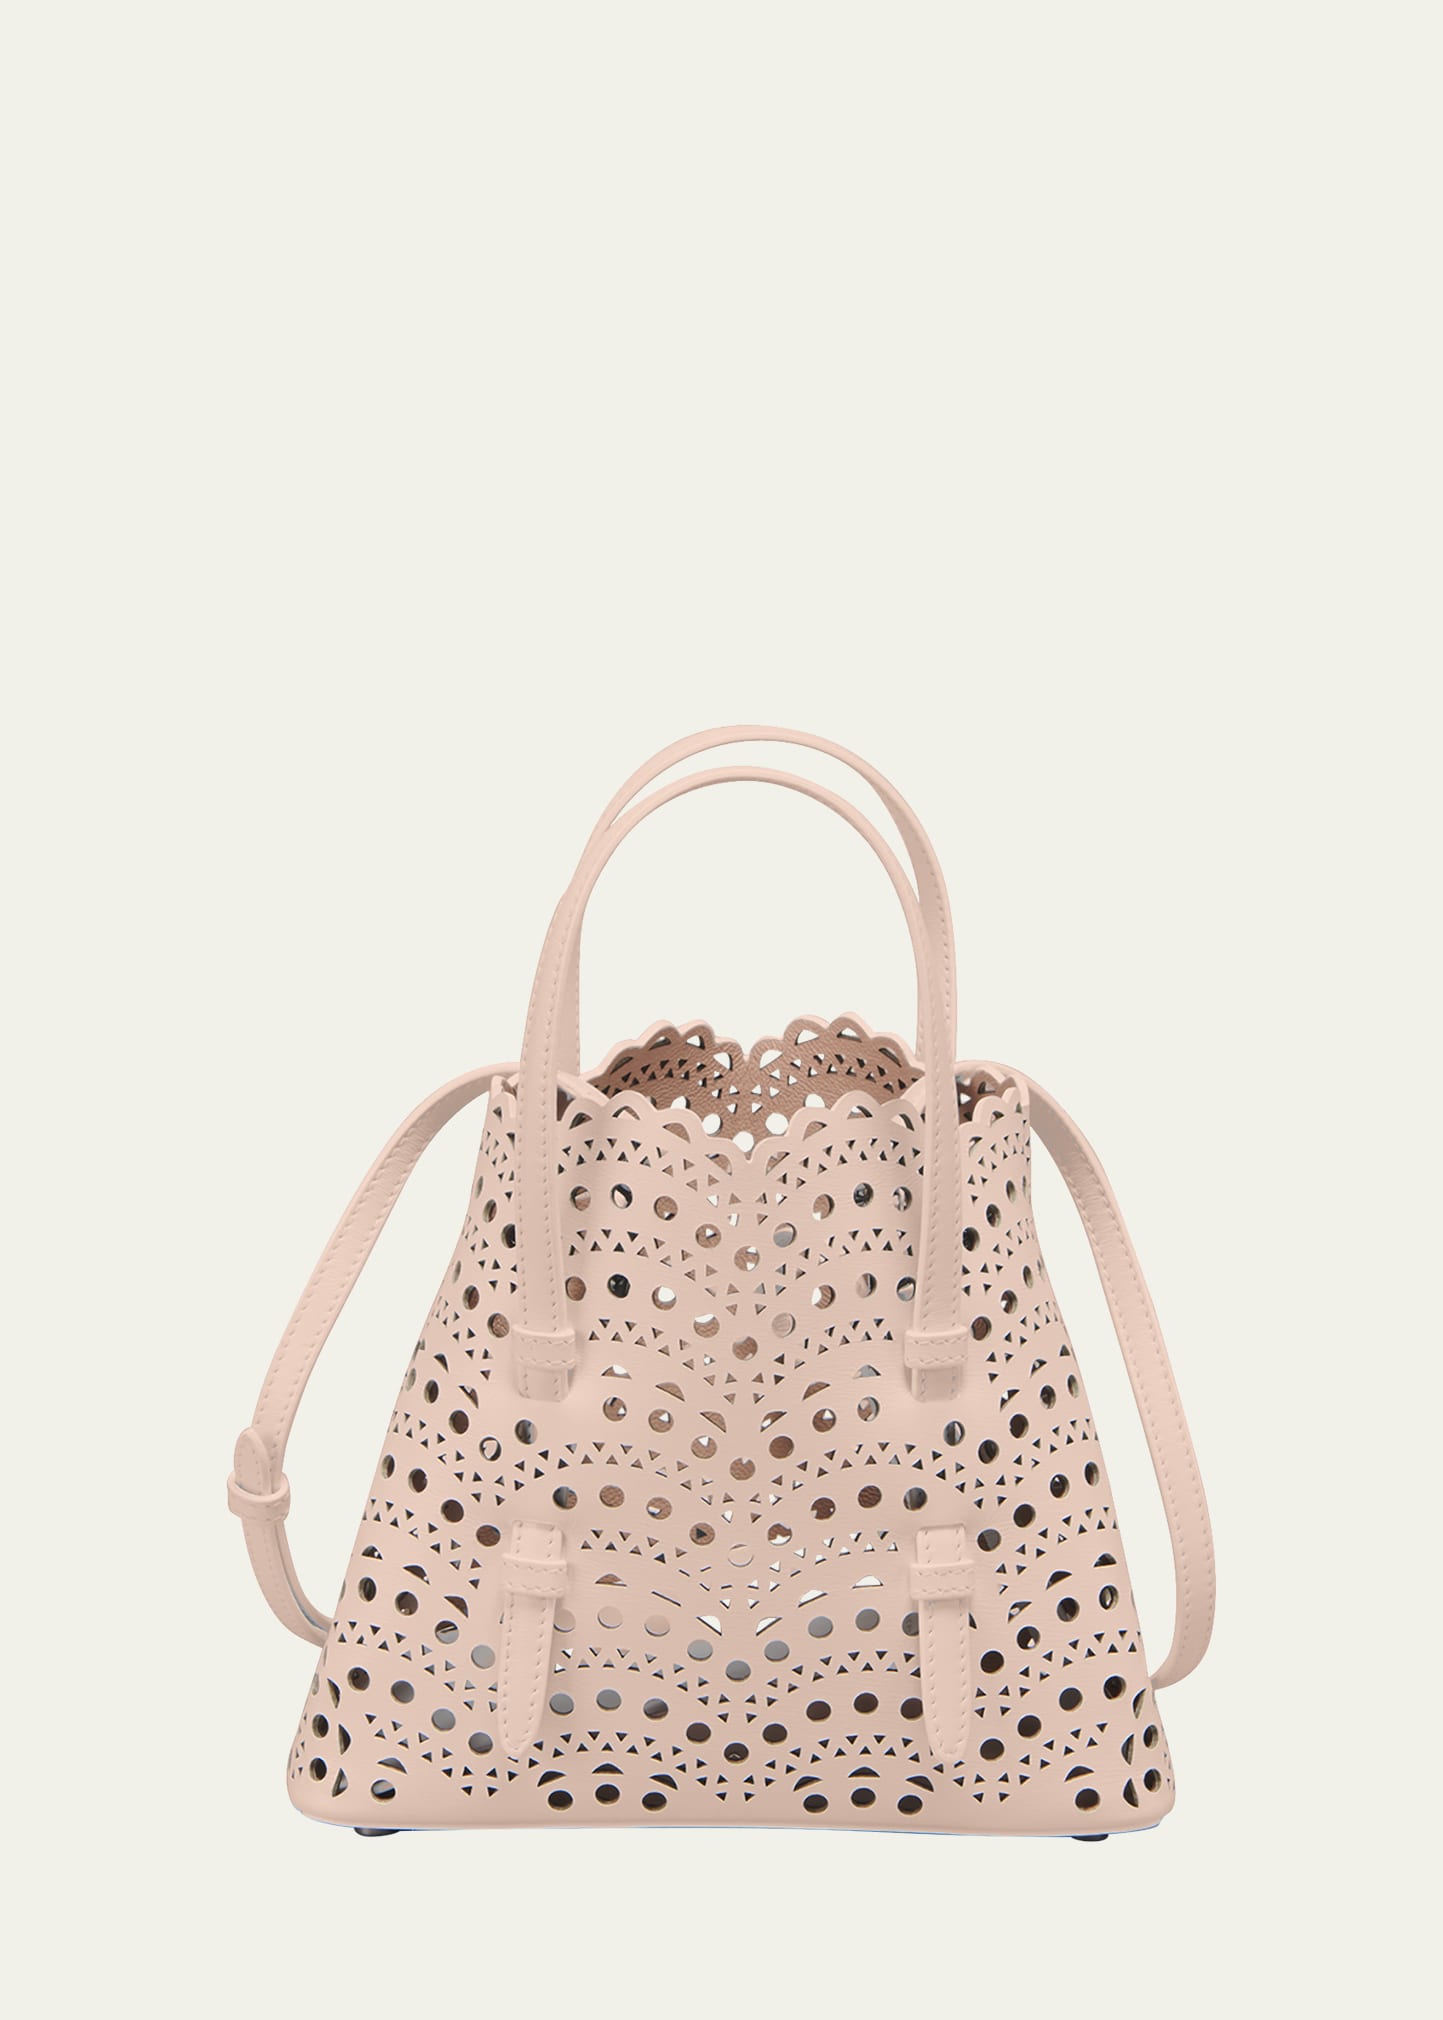 Mina 20 Tote Bag in Vienne Wave Perforated Leather